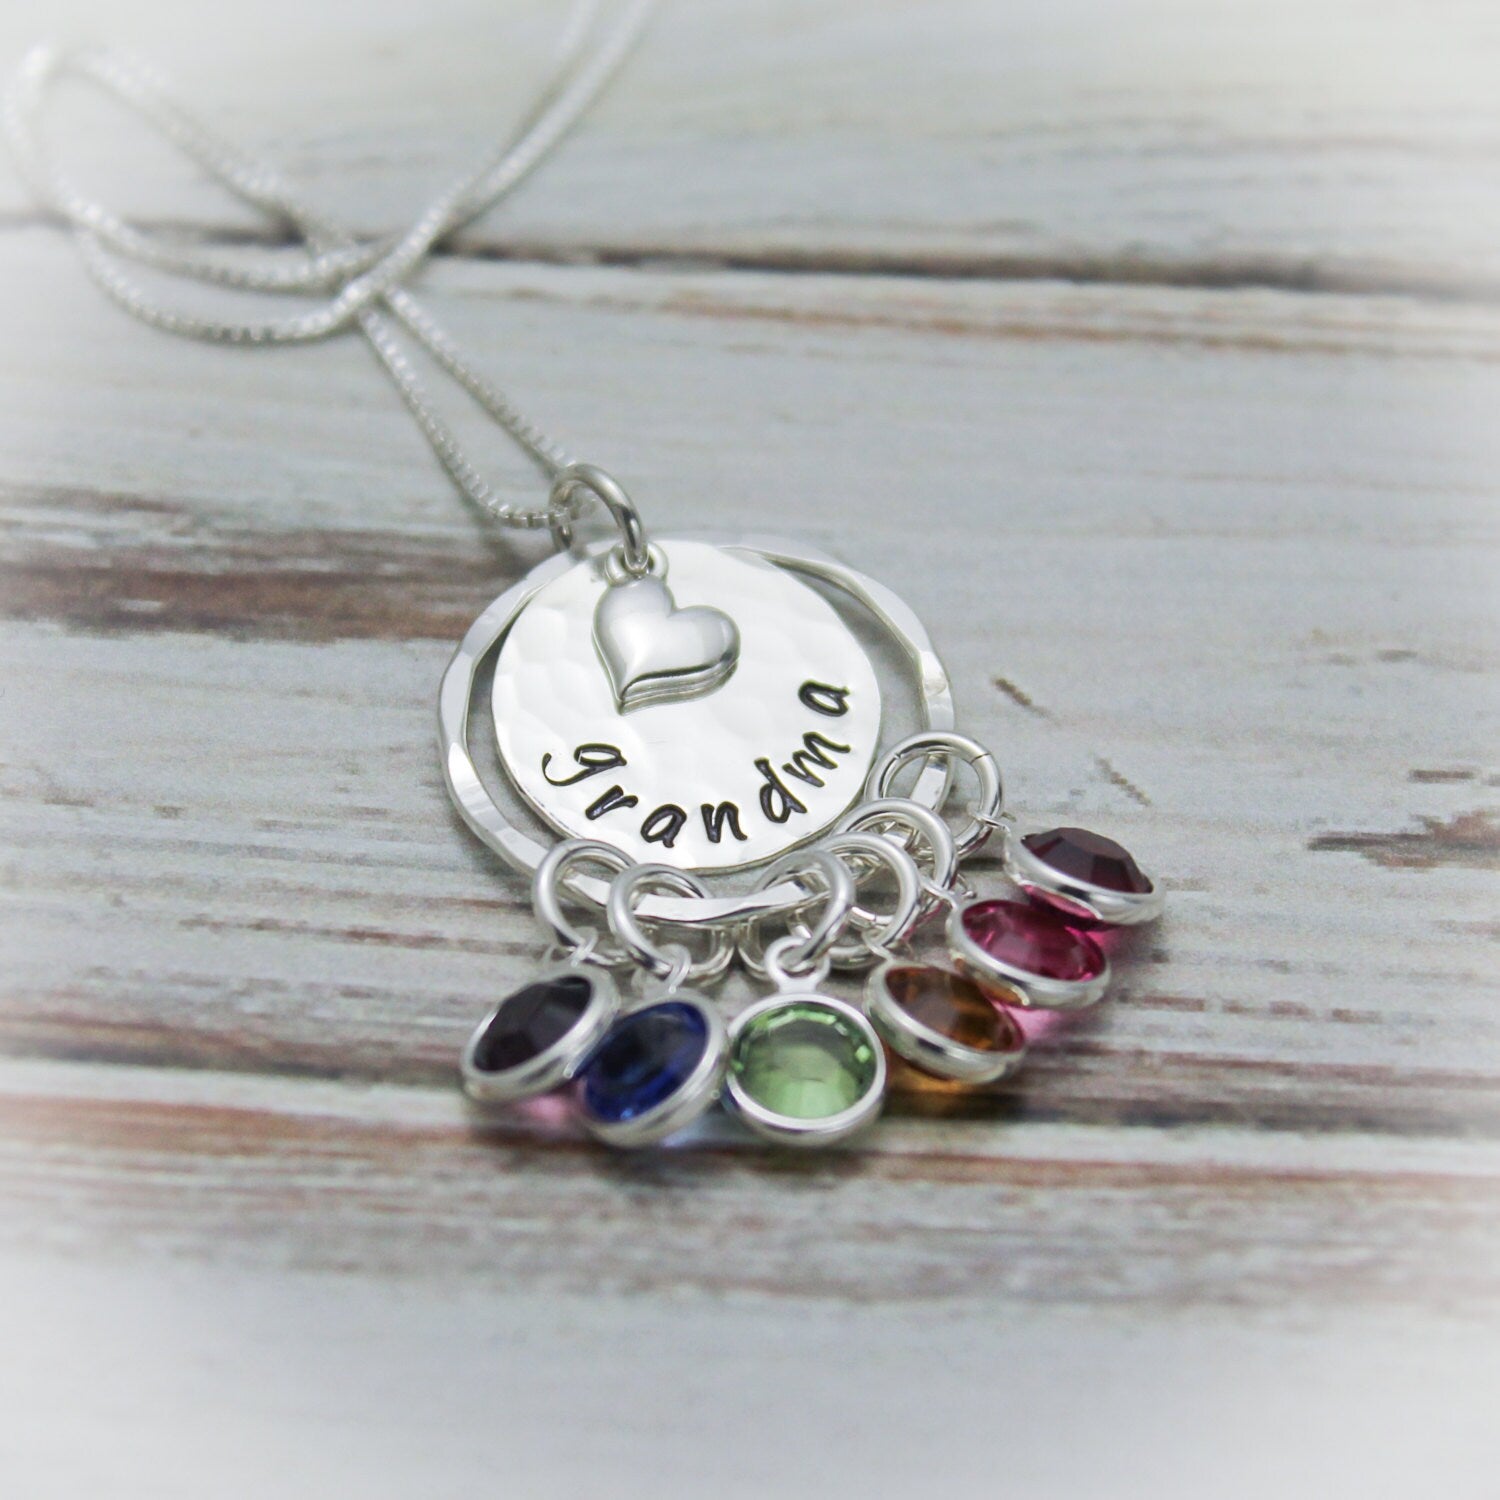 Grandma Necklace, Grandmother Necklace, Birthstone Necklace, Grandchildren Necklace, Hand Stamped Personalized, Mother's Day Gift, Silver